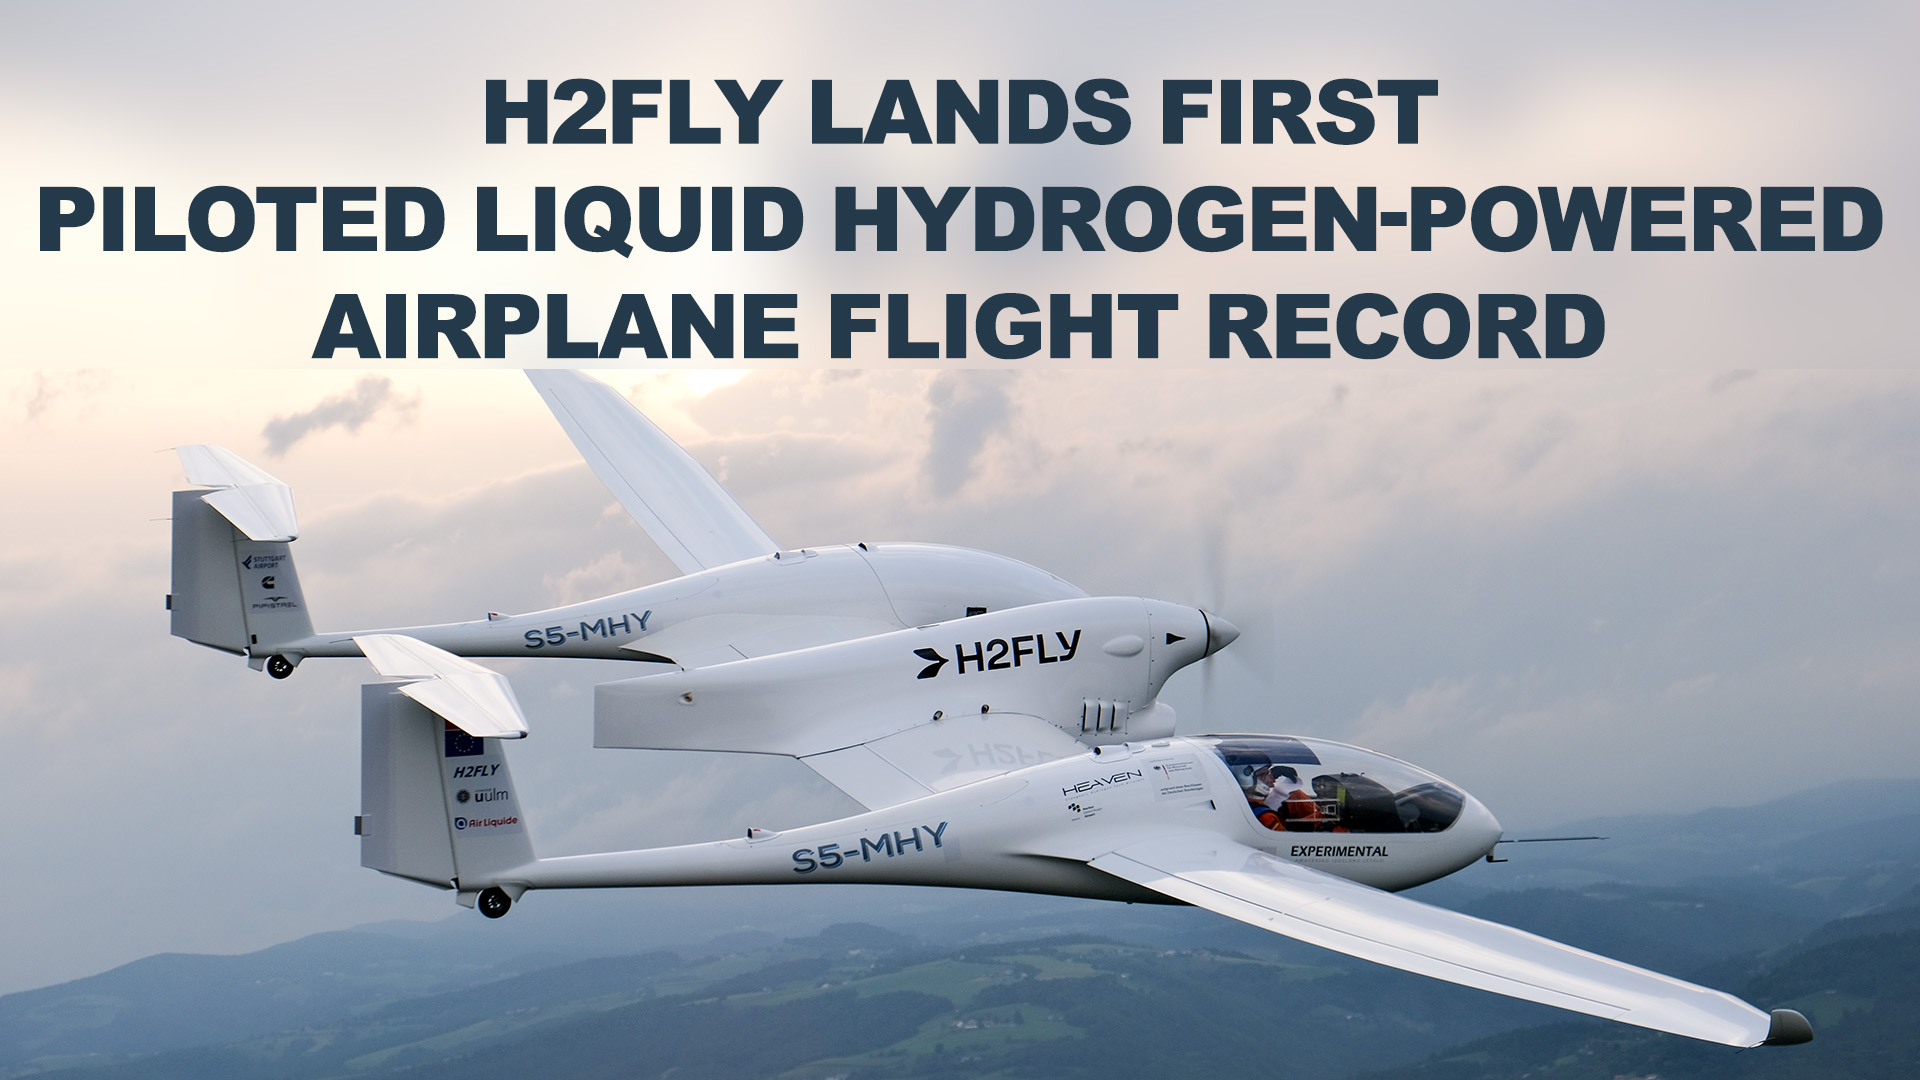 H2FLY HY4 First Piloted Flight of a Liquid Hydrogen-Powered Aircraft